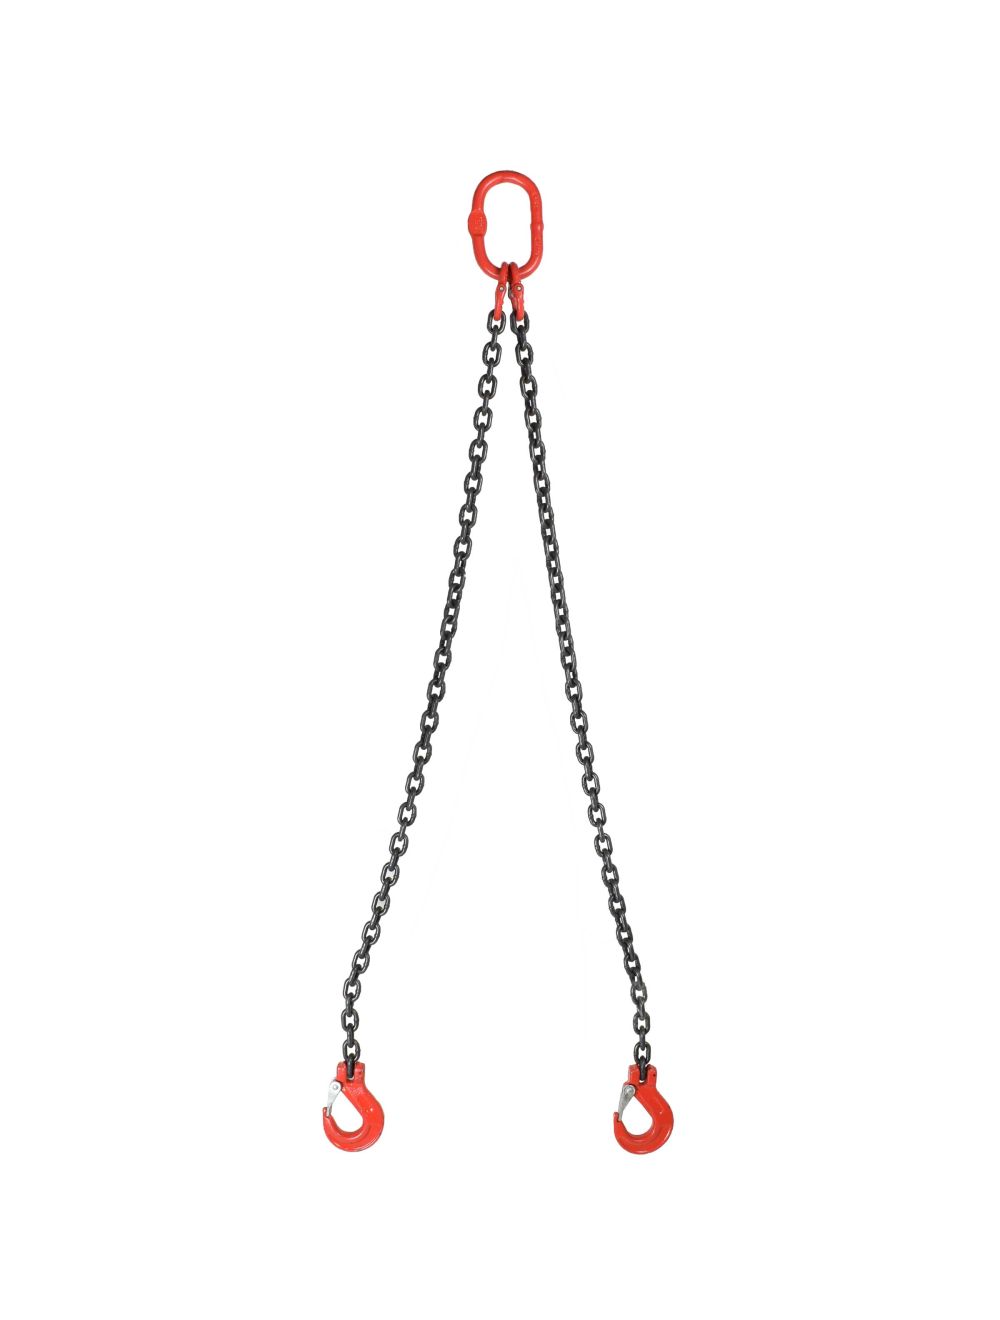 1/2 Chain Size Fixed-Leg Grade 80 7 Length 20800 lbs Load Capacity at 60° Mazzella DOS Welded Alloy Chain Sling 